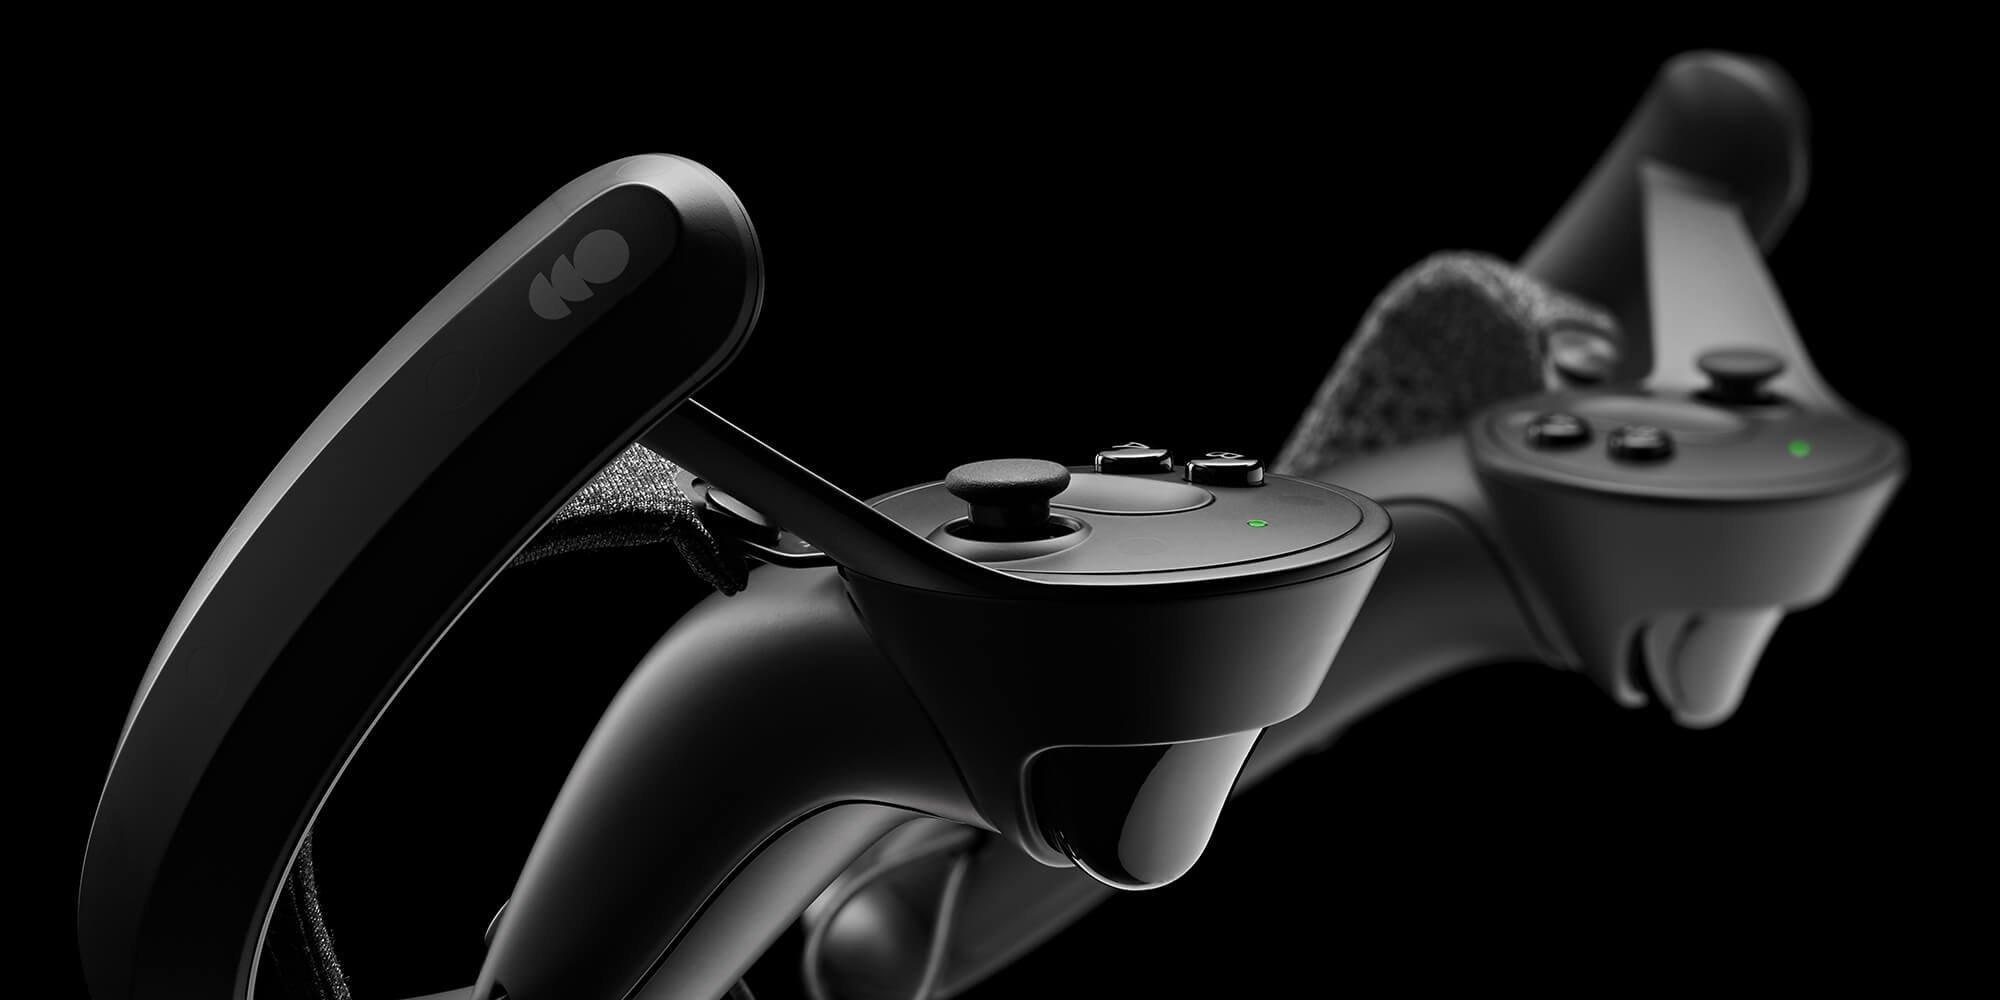 Valve Index Controller - Right Only | GameStop